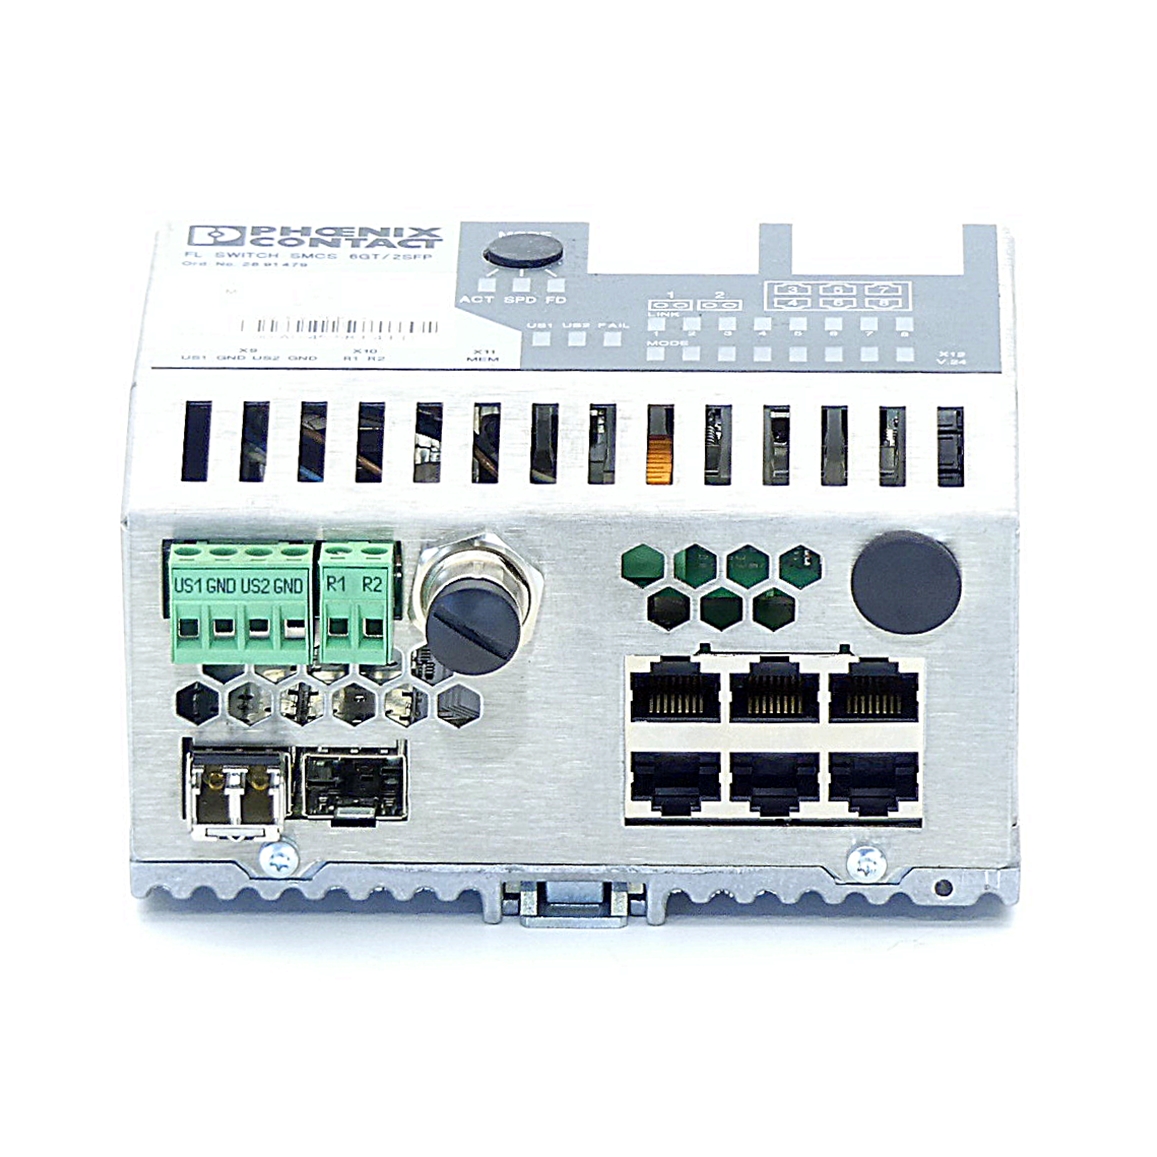 Industrial Ethernet Switch SMCS 6GT/2SFP 